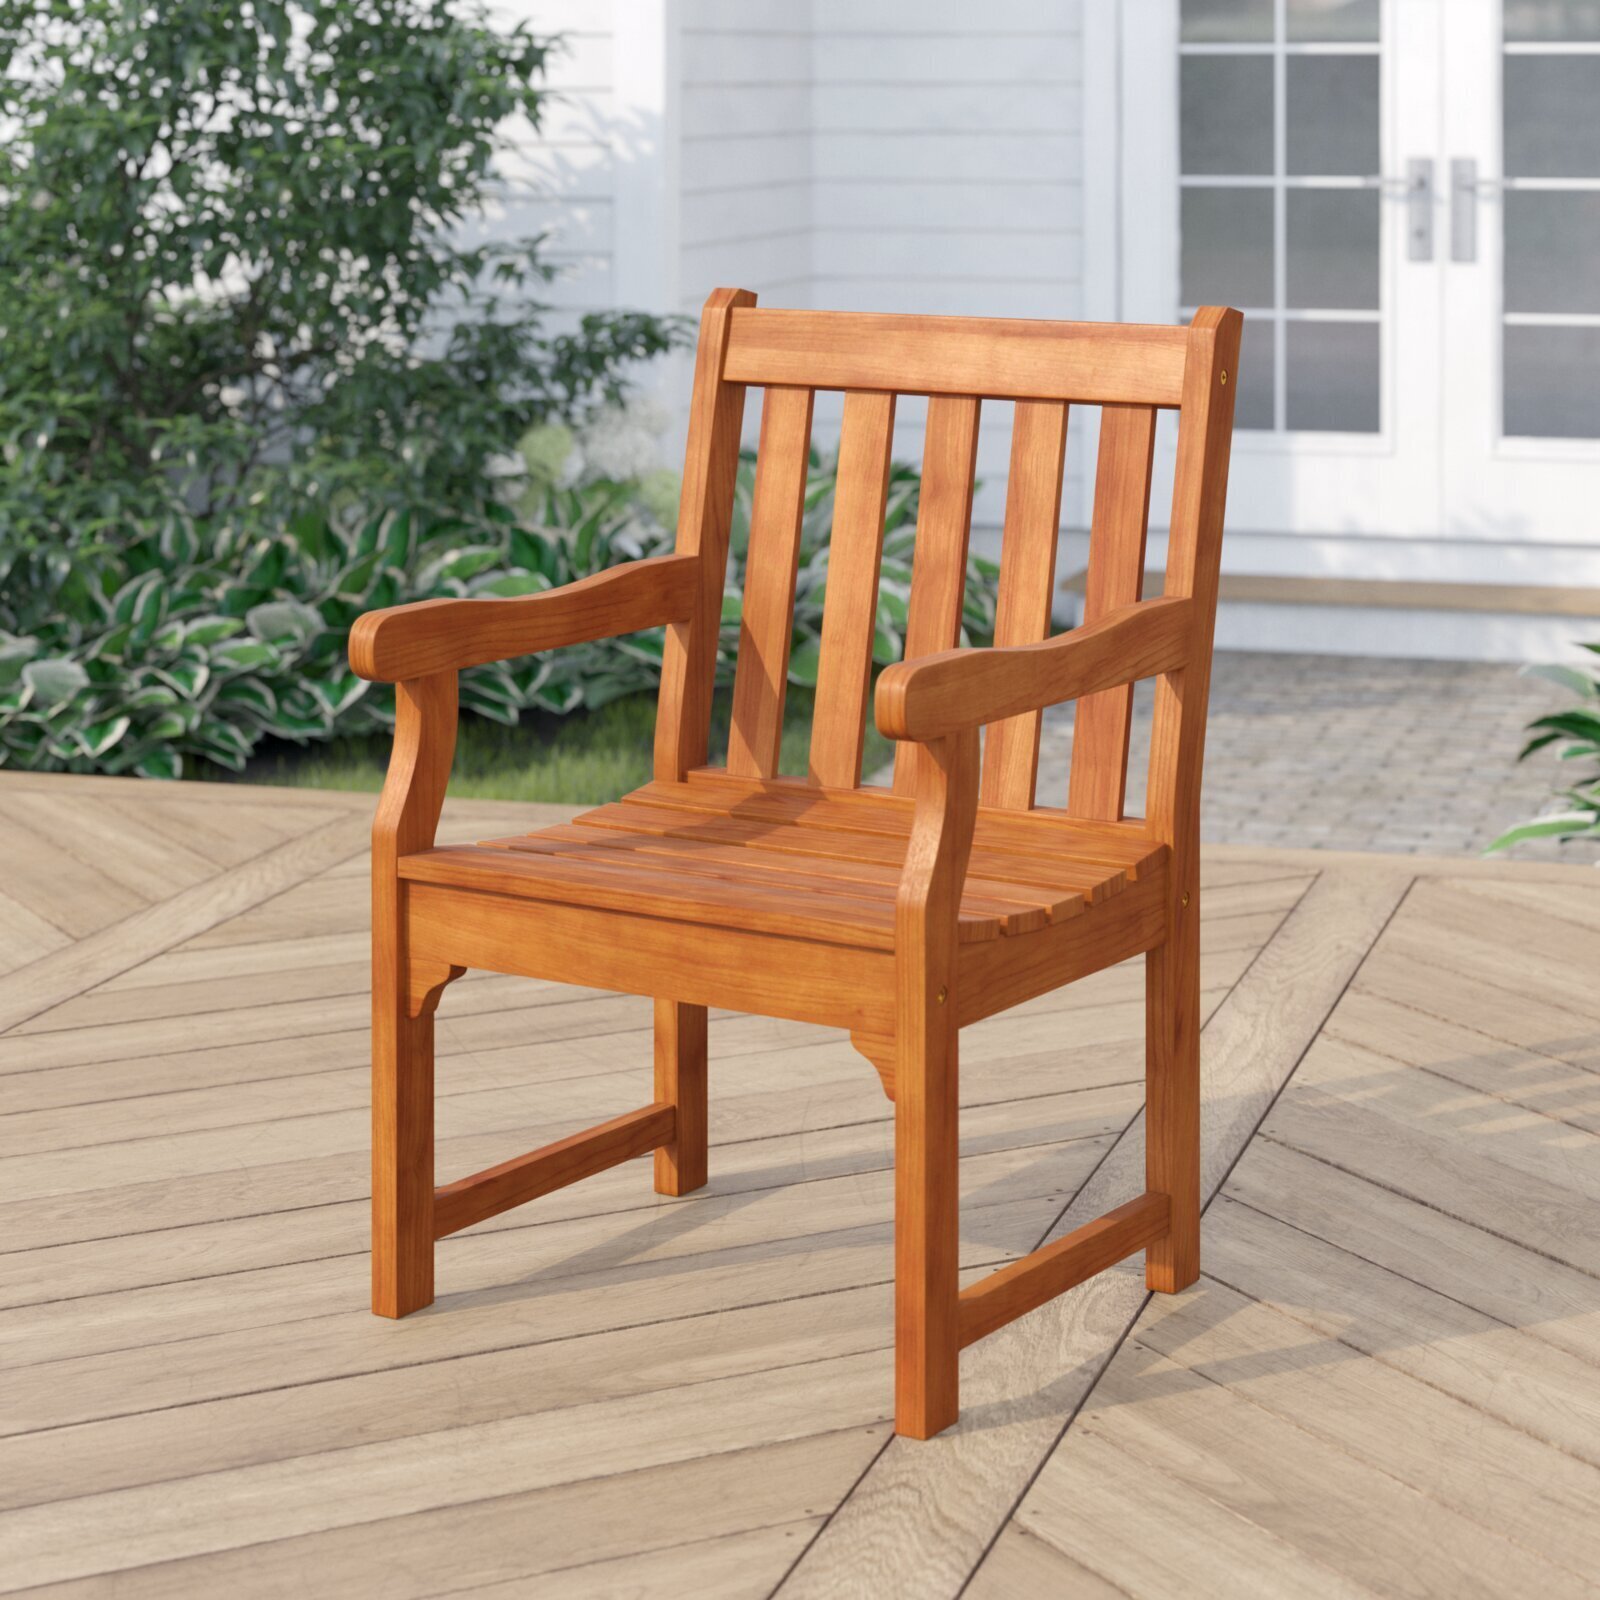 Classic slatted outdoor chair